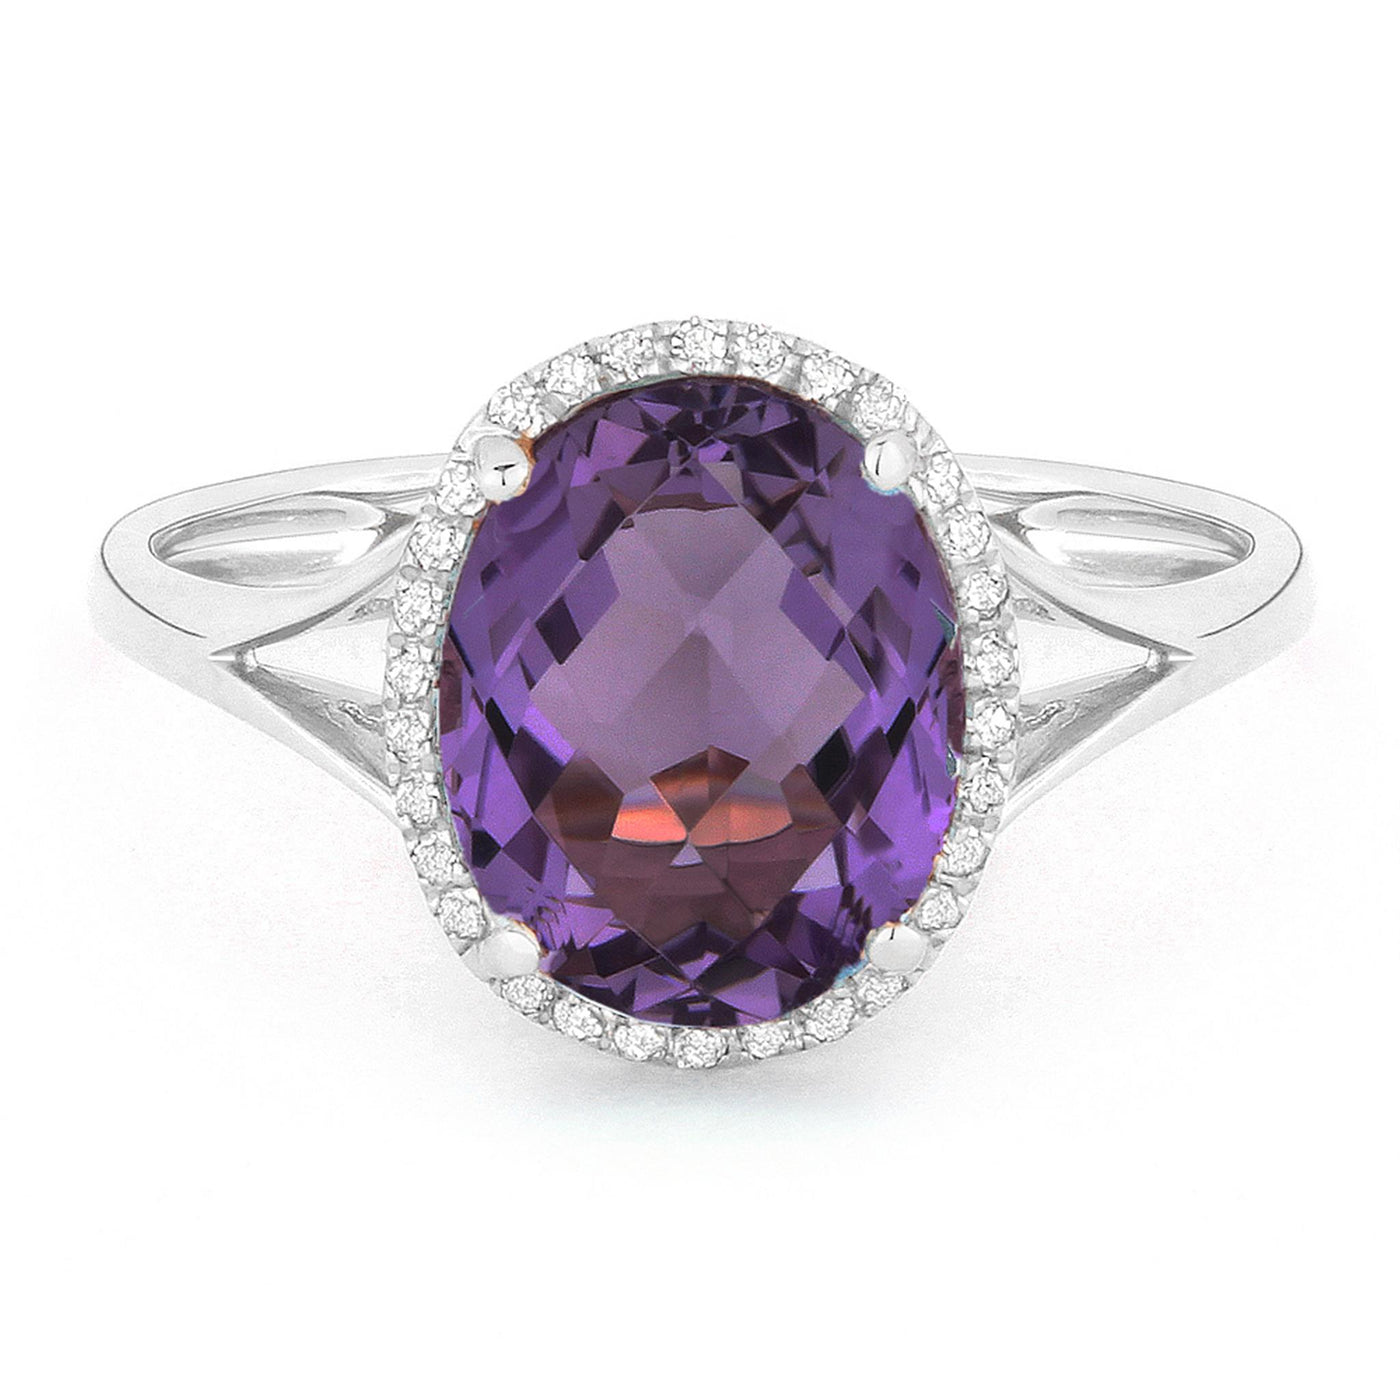 Madison L 14K White Gold 2.48ctw Halo Style Amethyst and Diamonds Ring